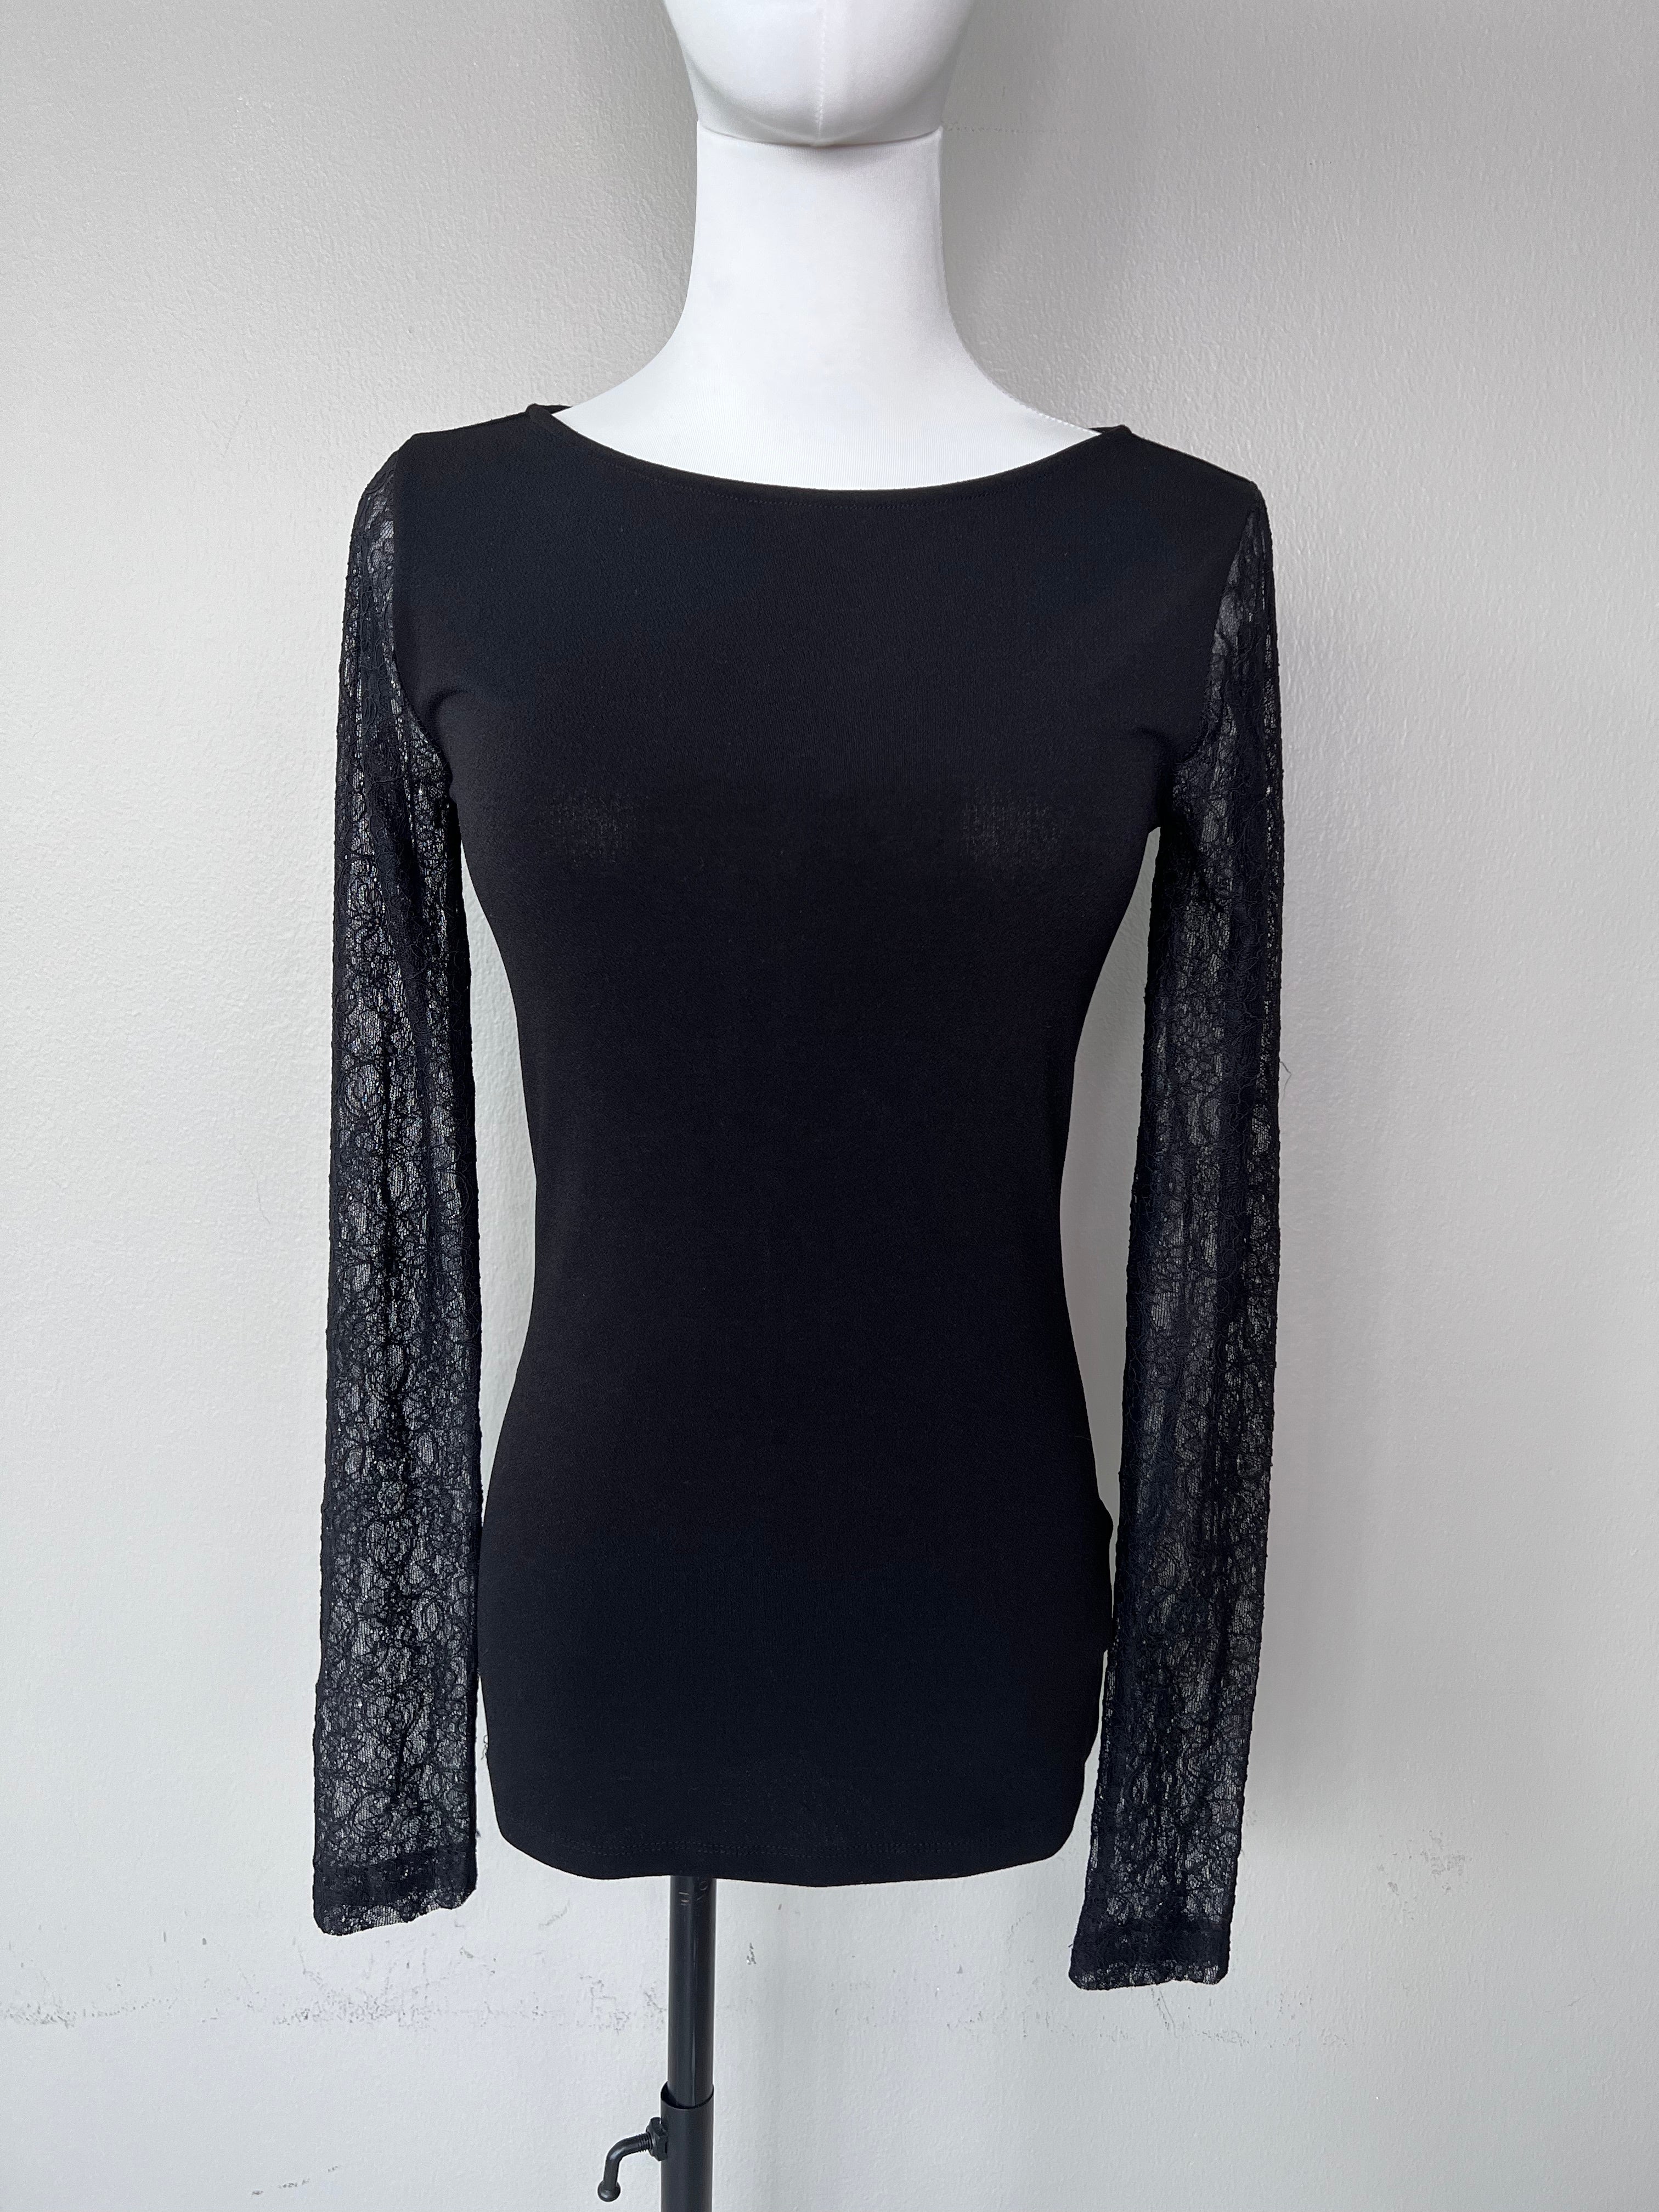 Black fitted long sleeve top with lace details - ALICE + OLIVIA